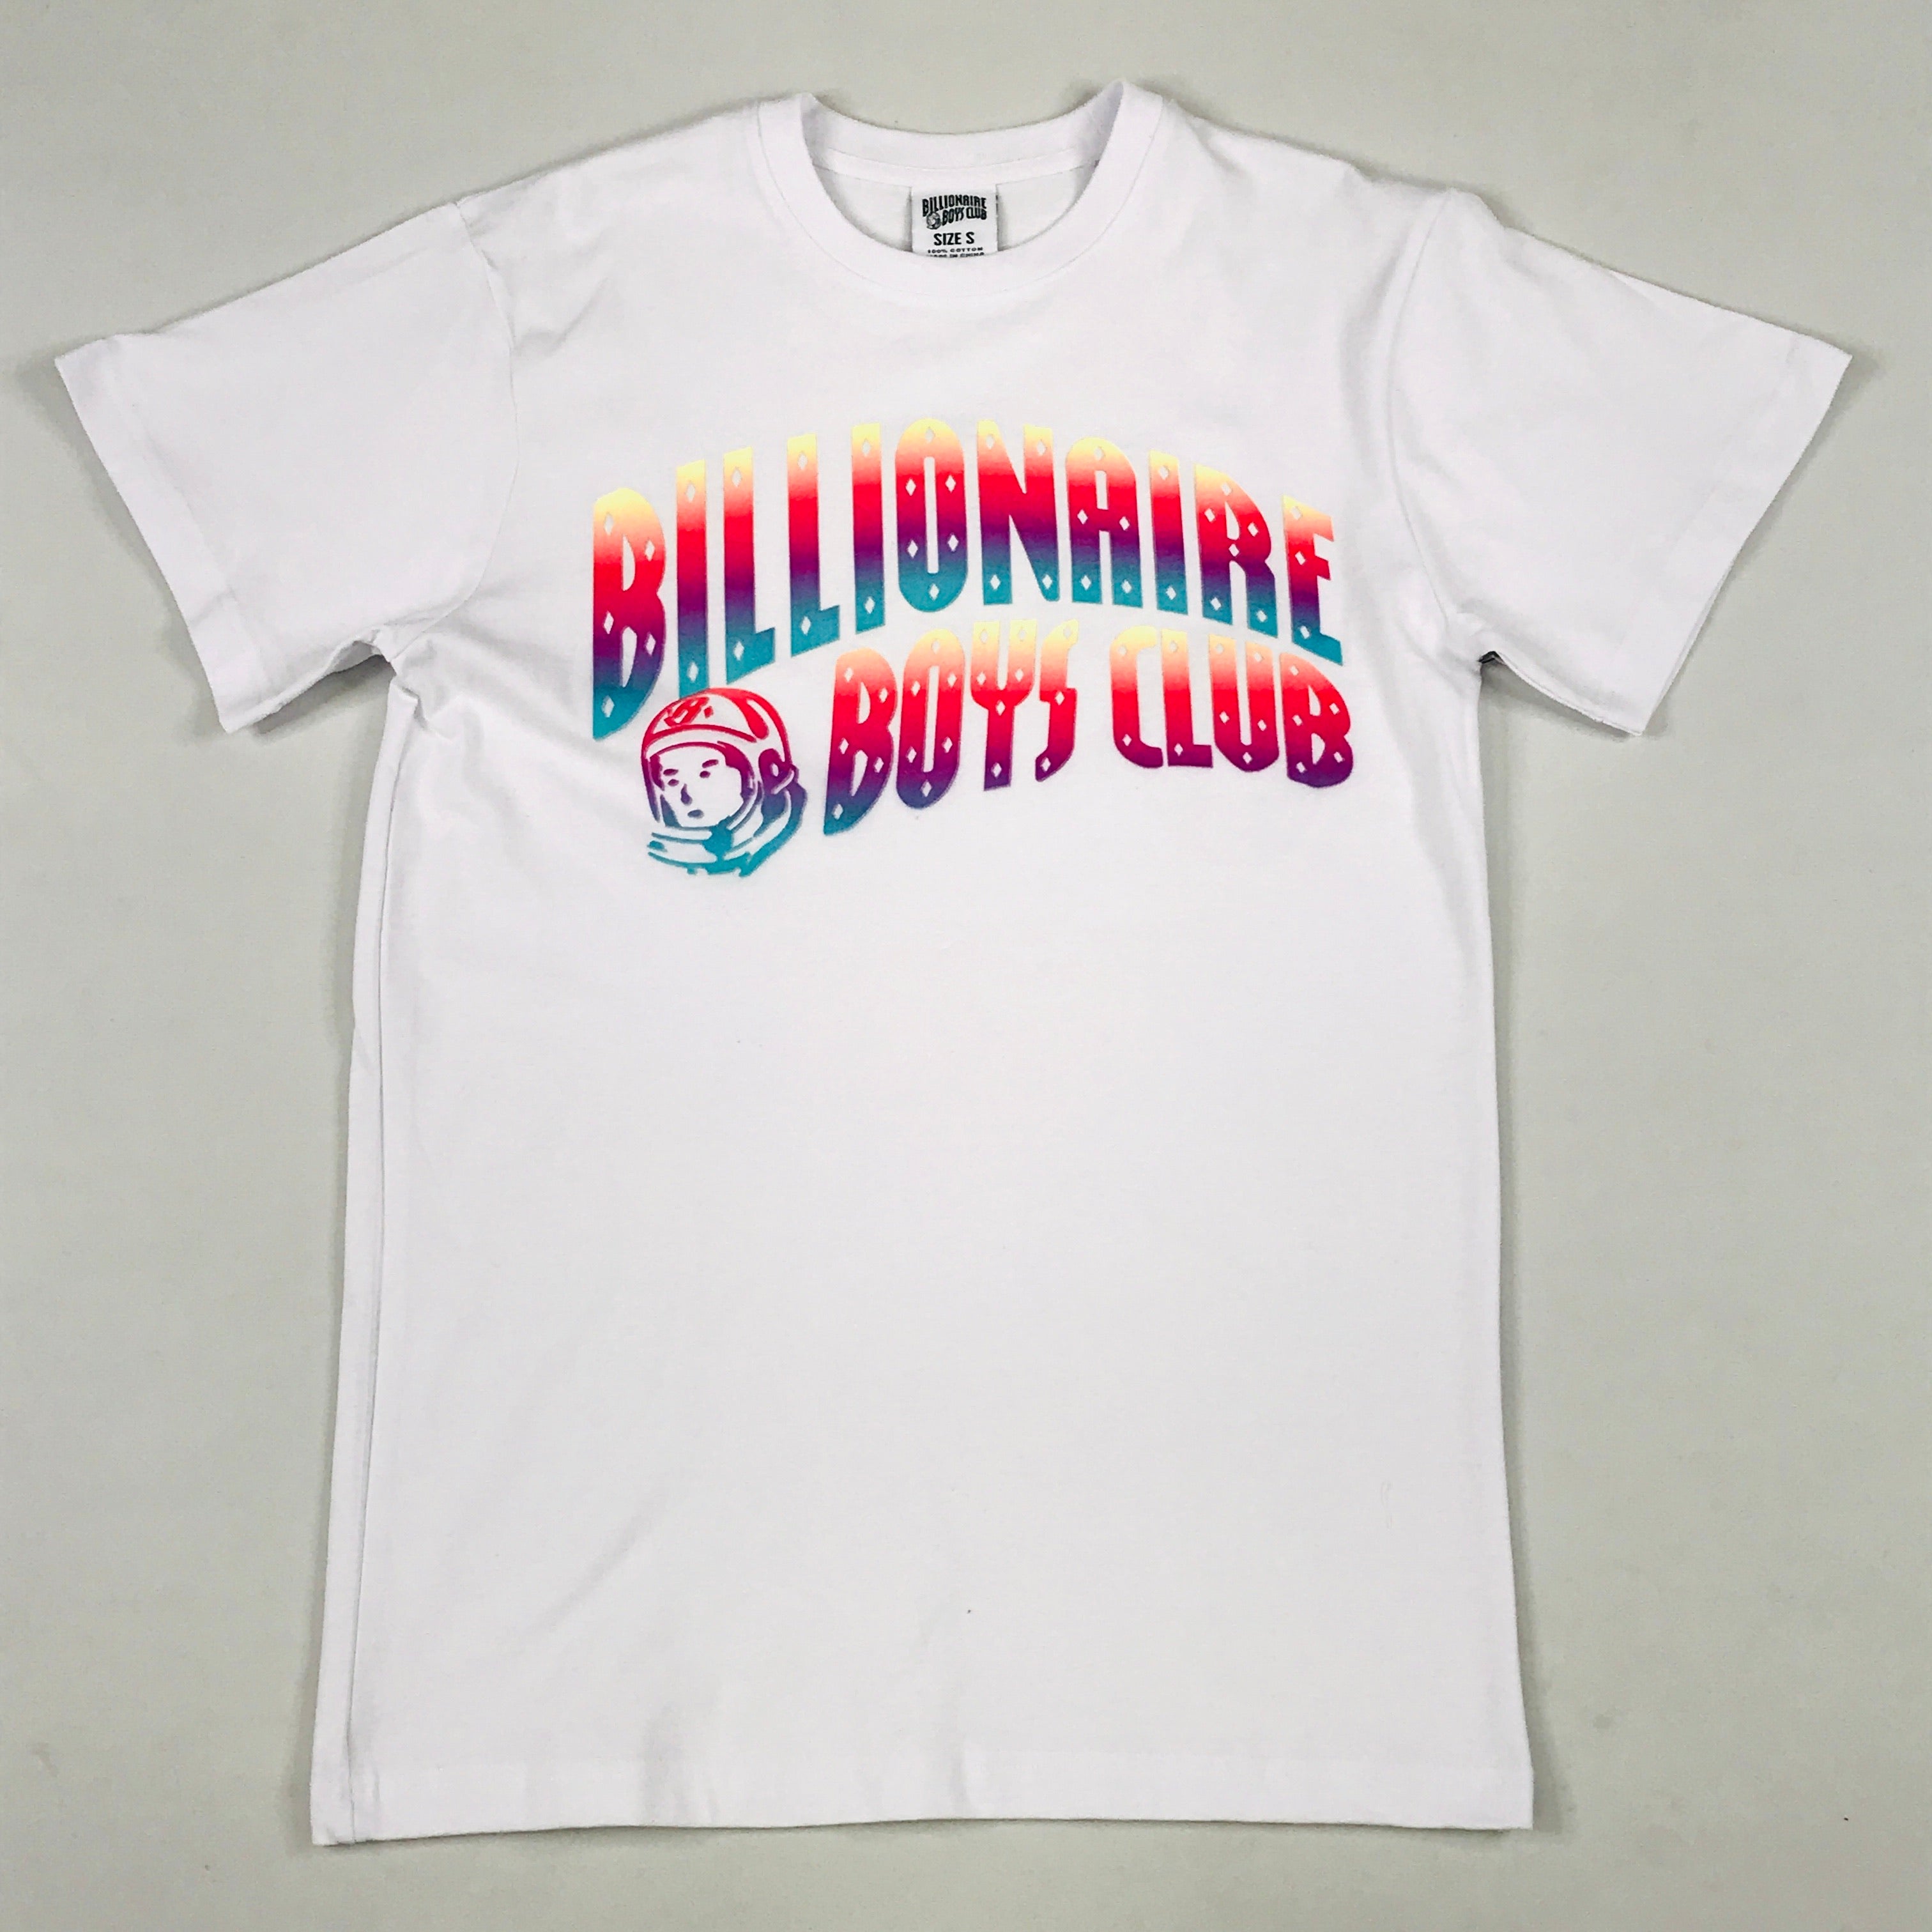 BBC BB Prism ss tee in white